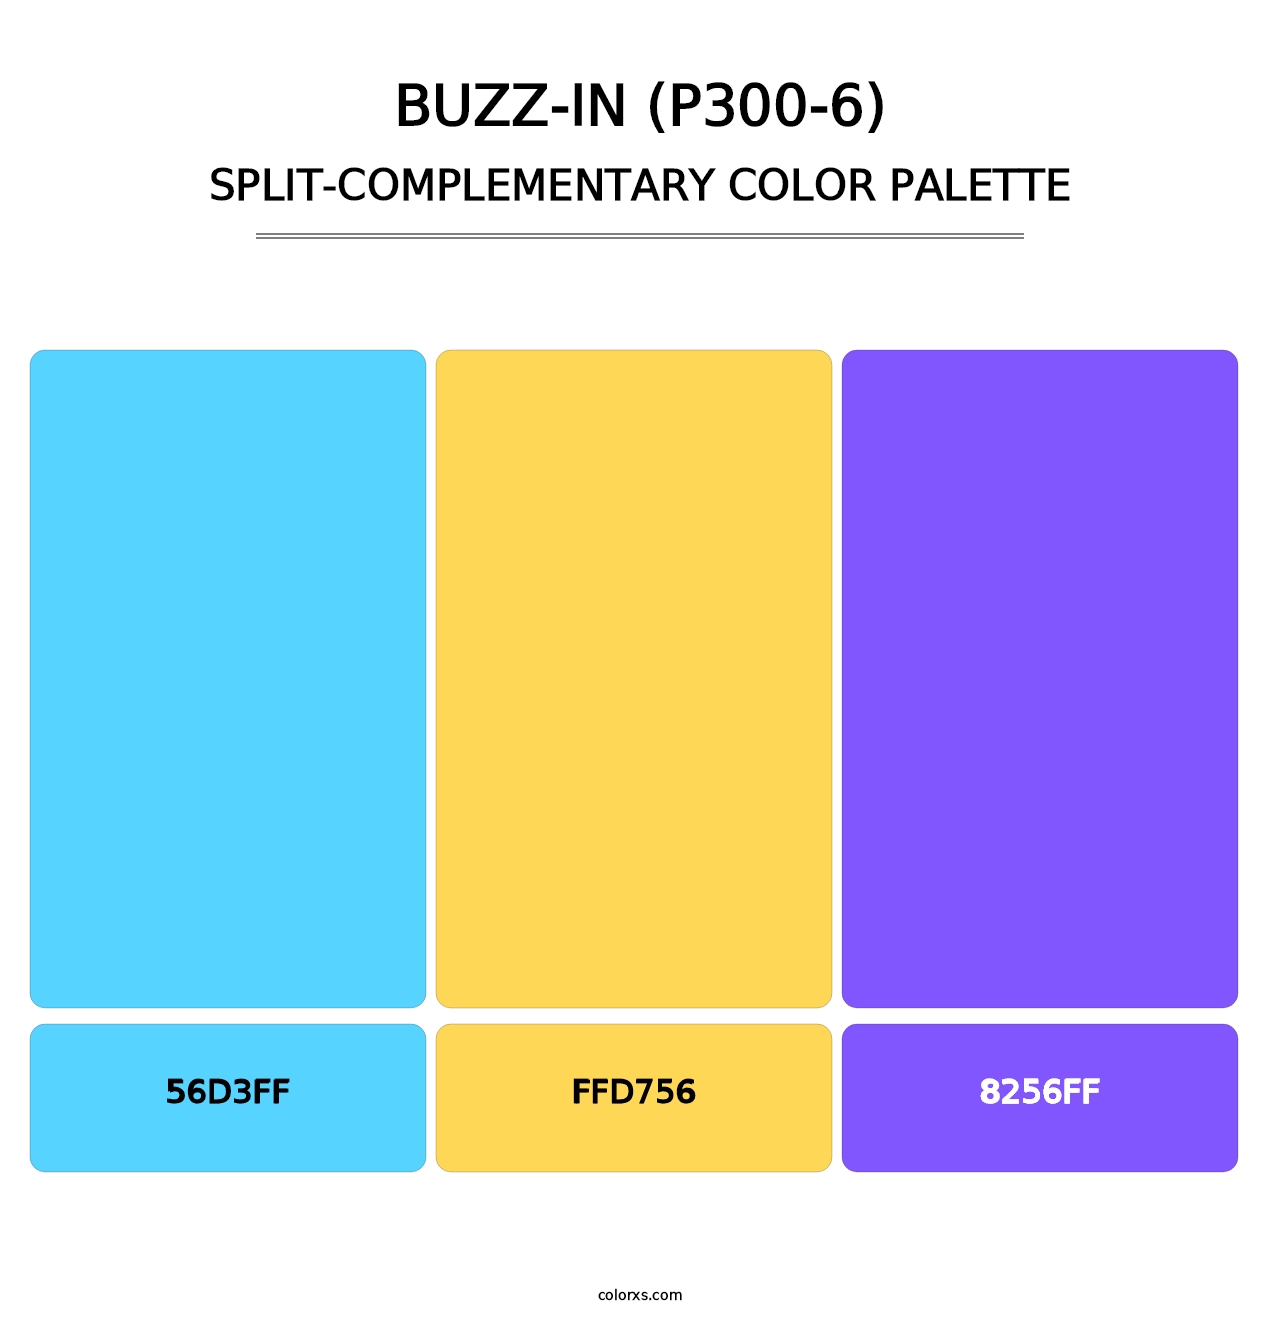 Buzz-In (P300-6) - Split-Complementary Color Palette